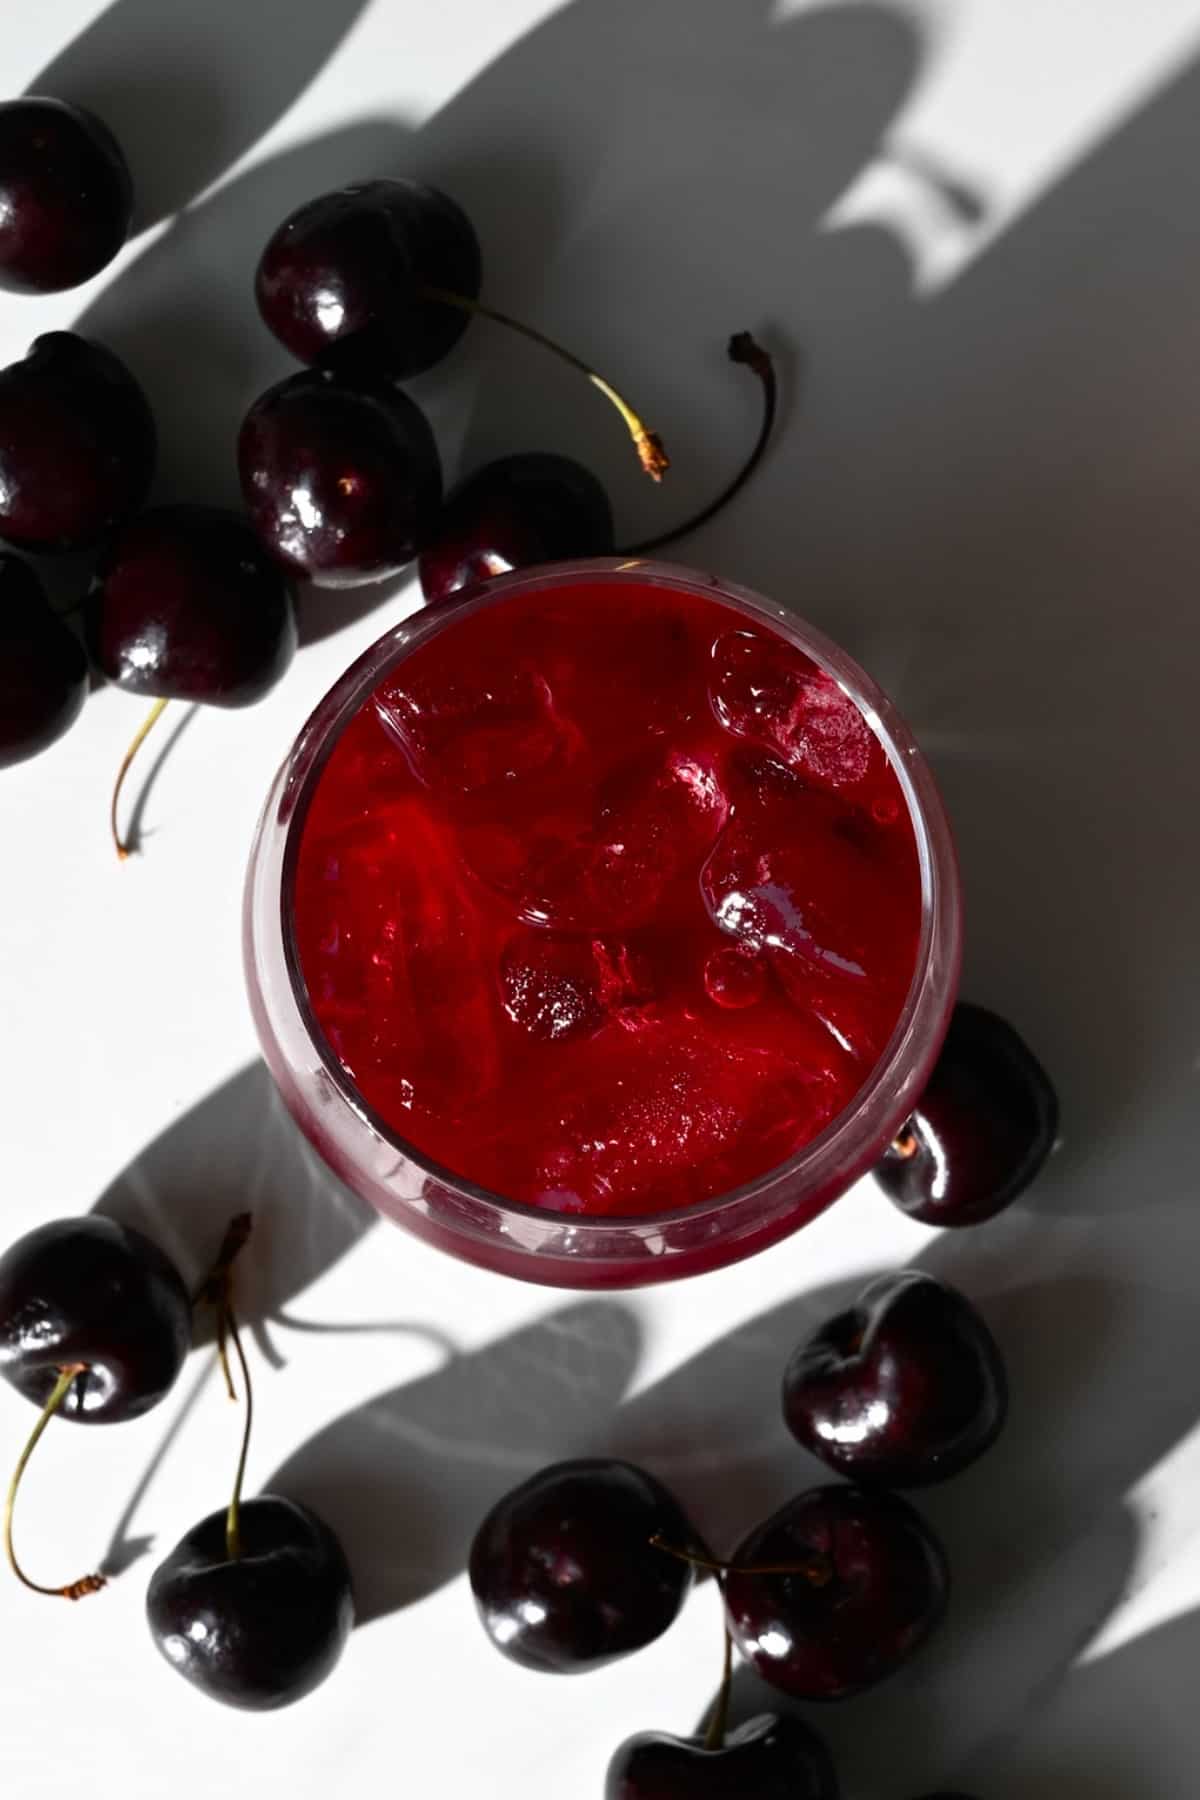 Top view of cherry juice in a glass with ice